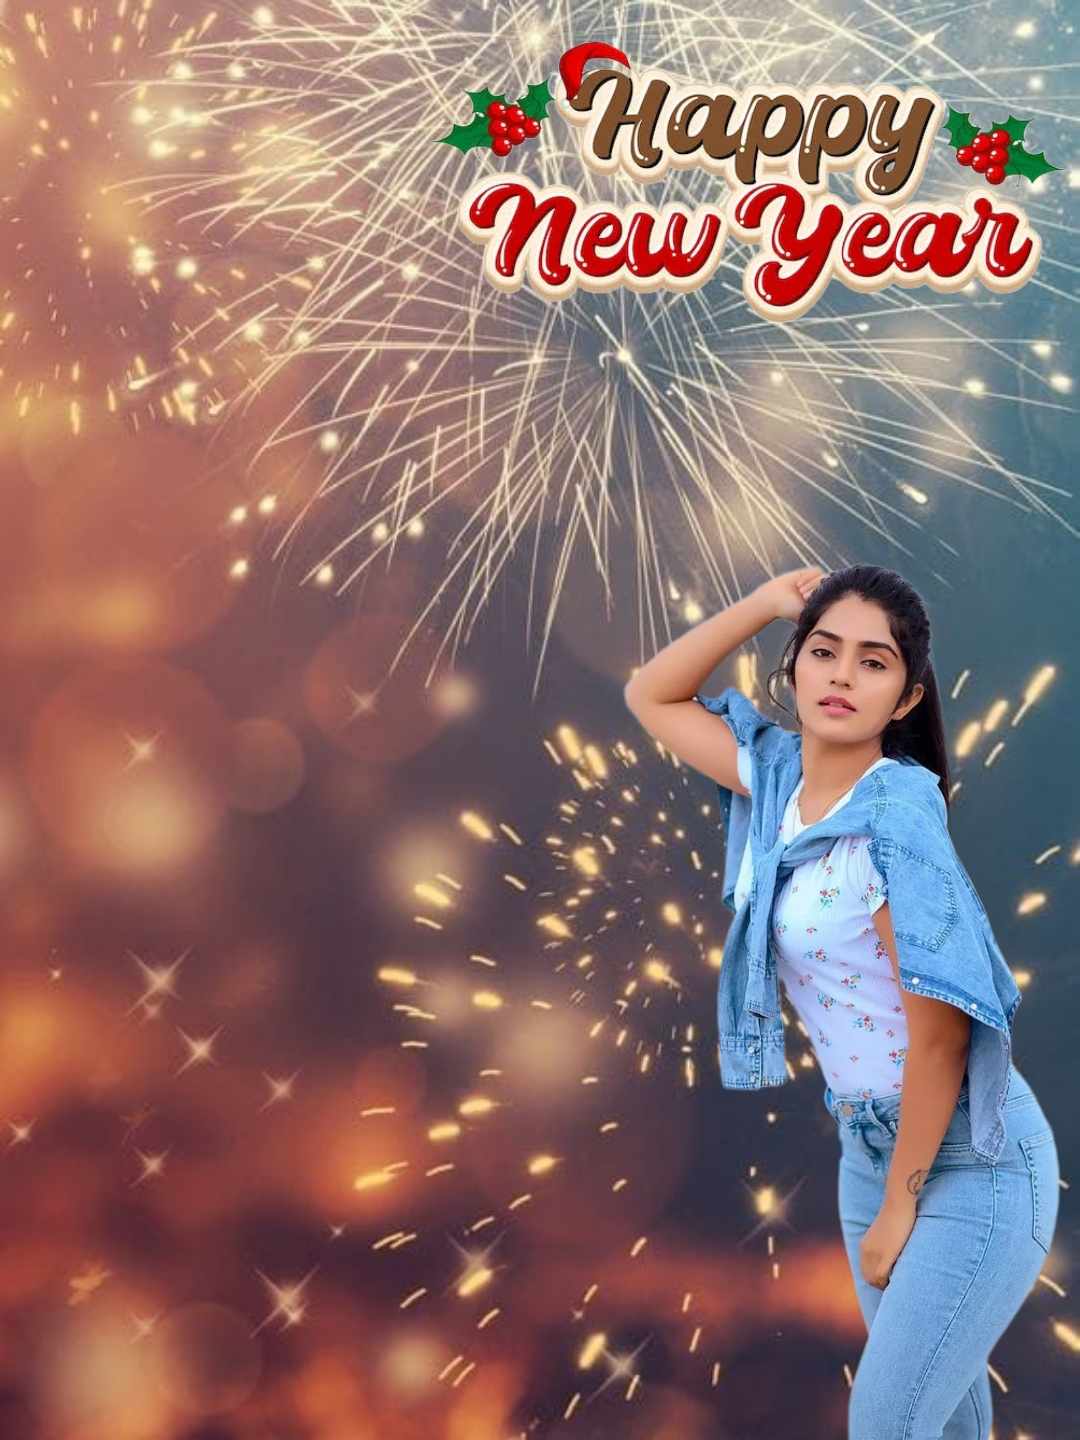 New Year Girl Background Images for editing